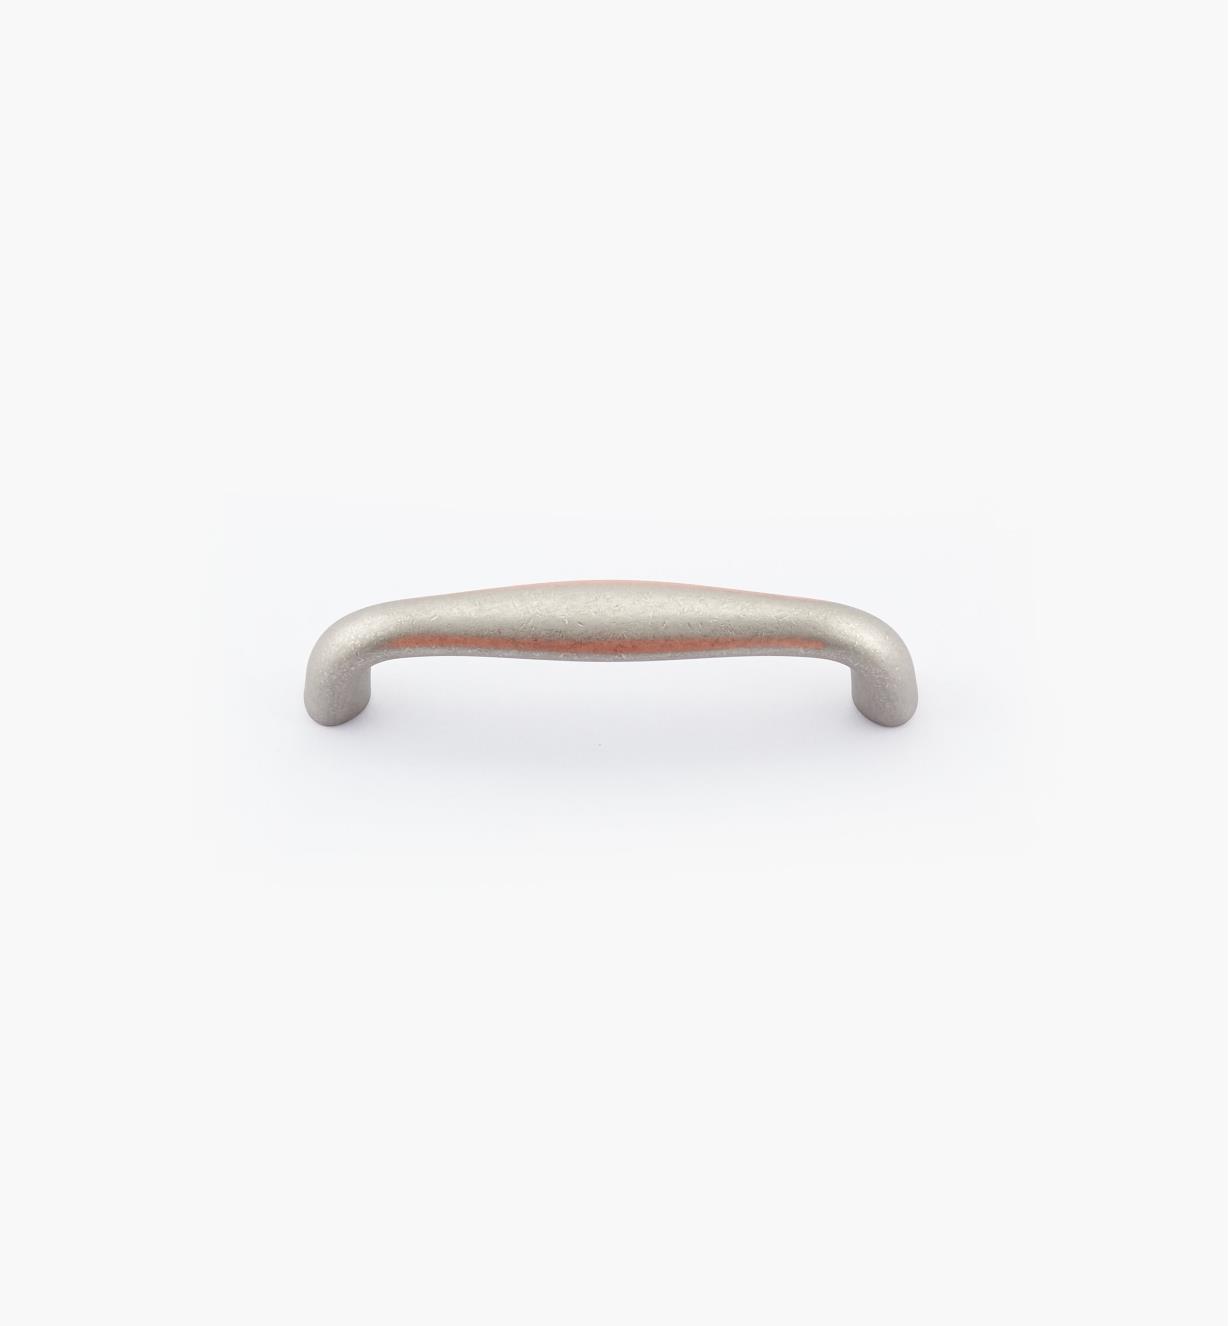 02W1845 - 3 3/8" Weathered Nickel-Copper Small Pull (3")